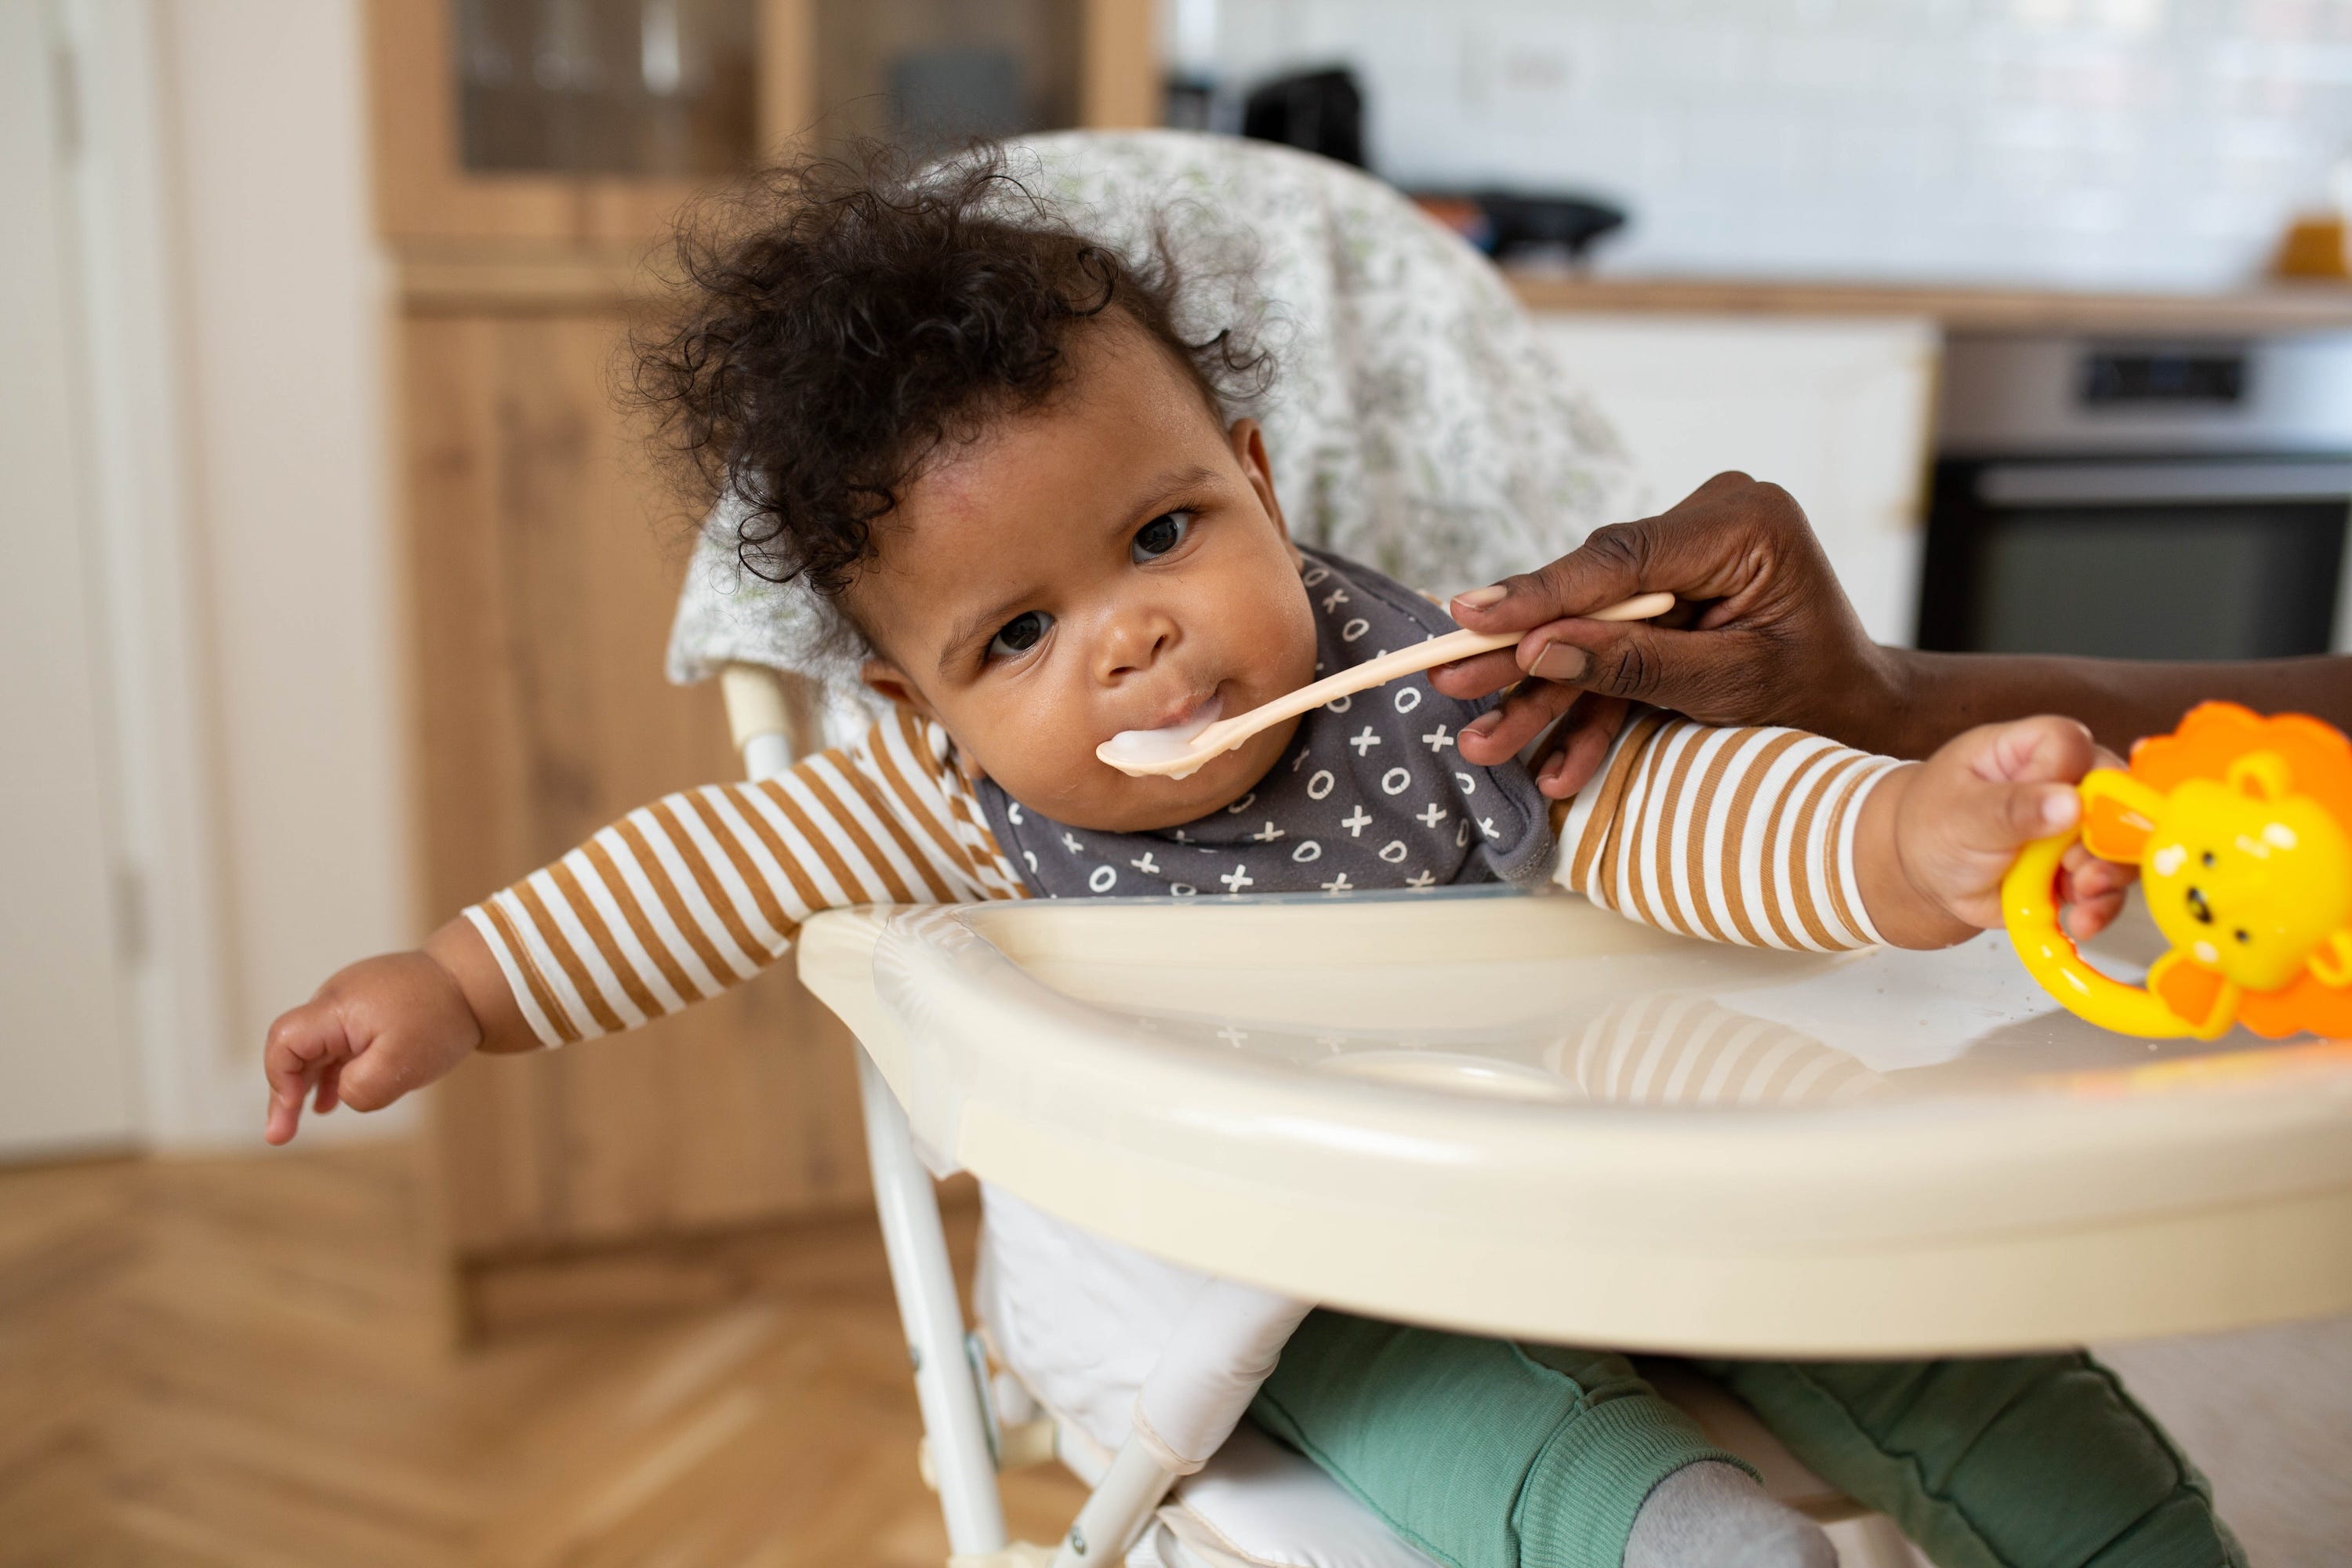 microsoft, i'm a pediatric dietitian. here are 4 mistakes parents make when starting solids with their babies.